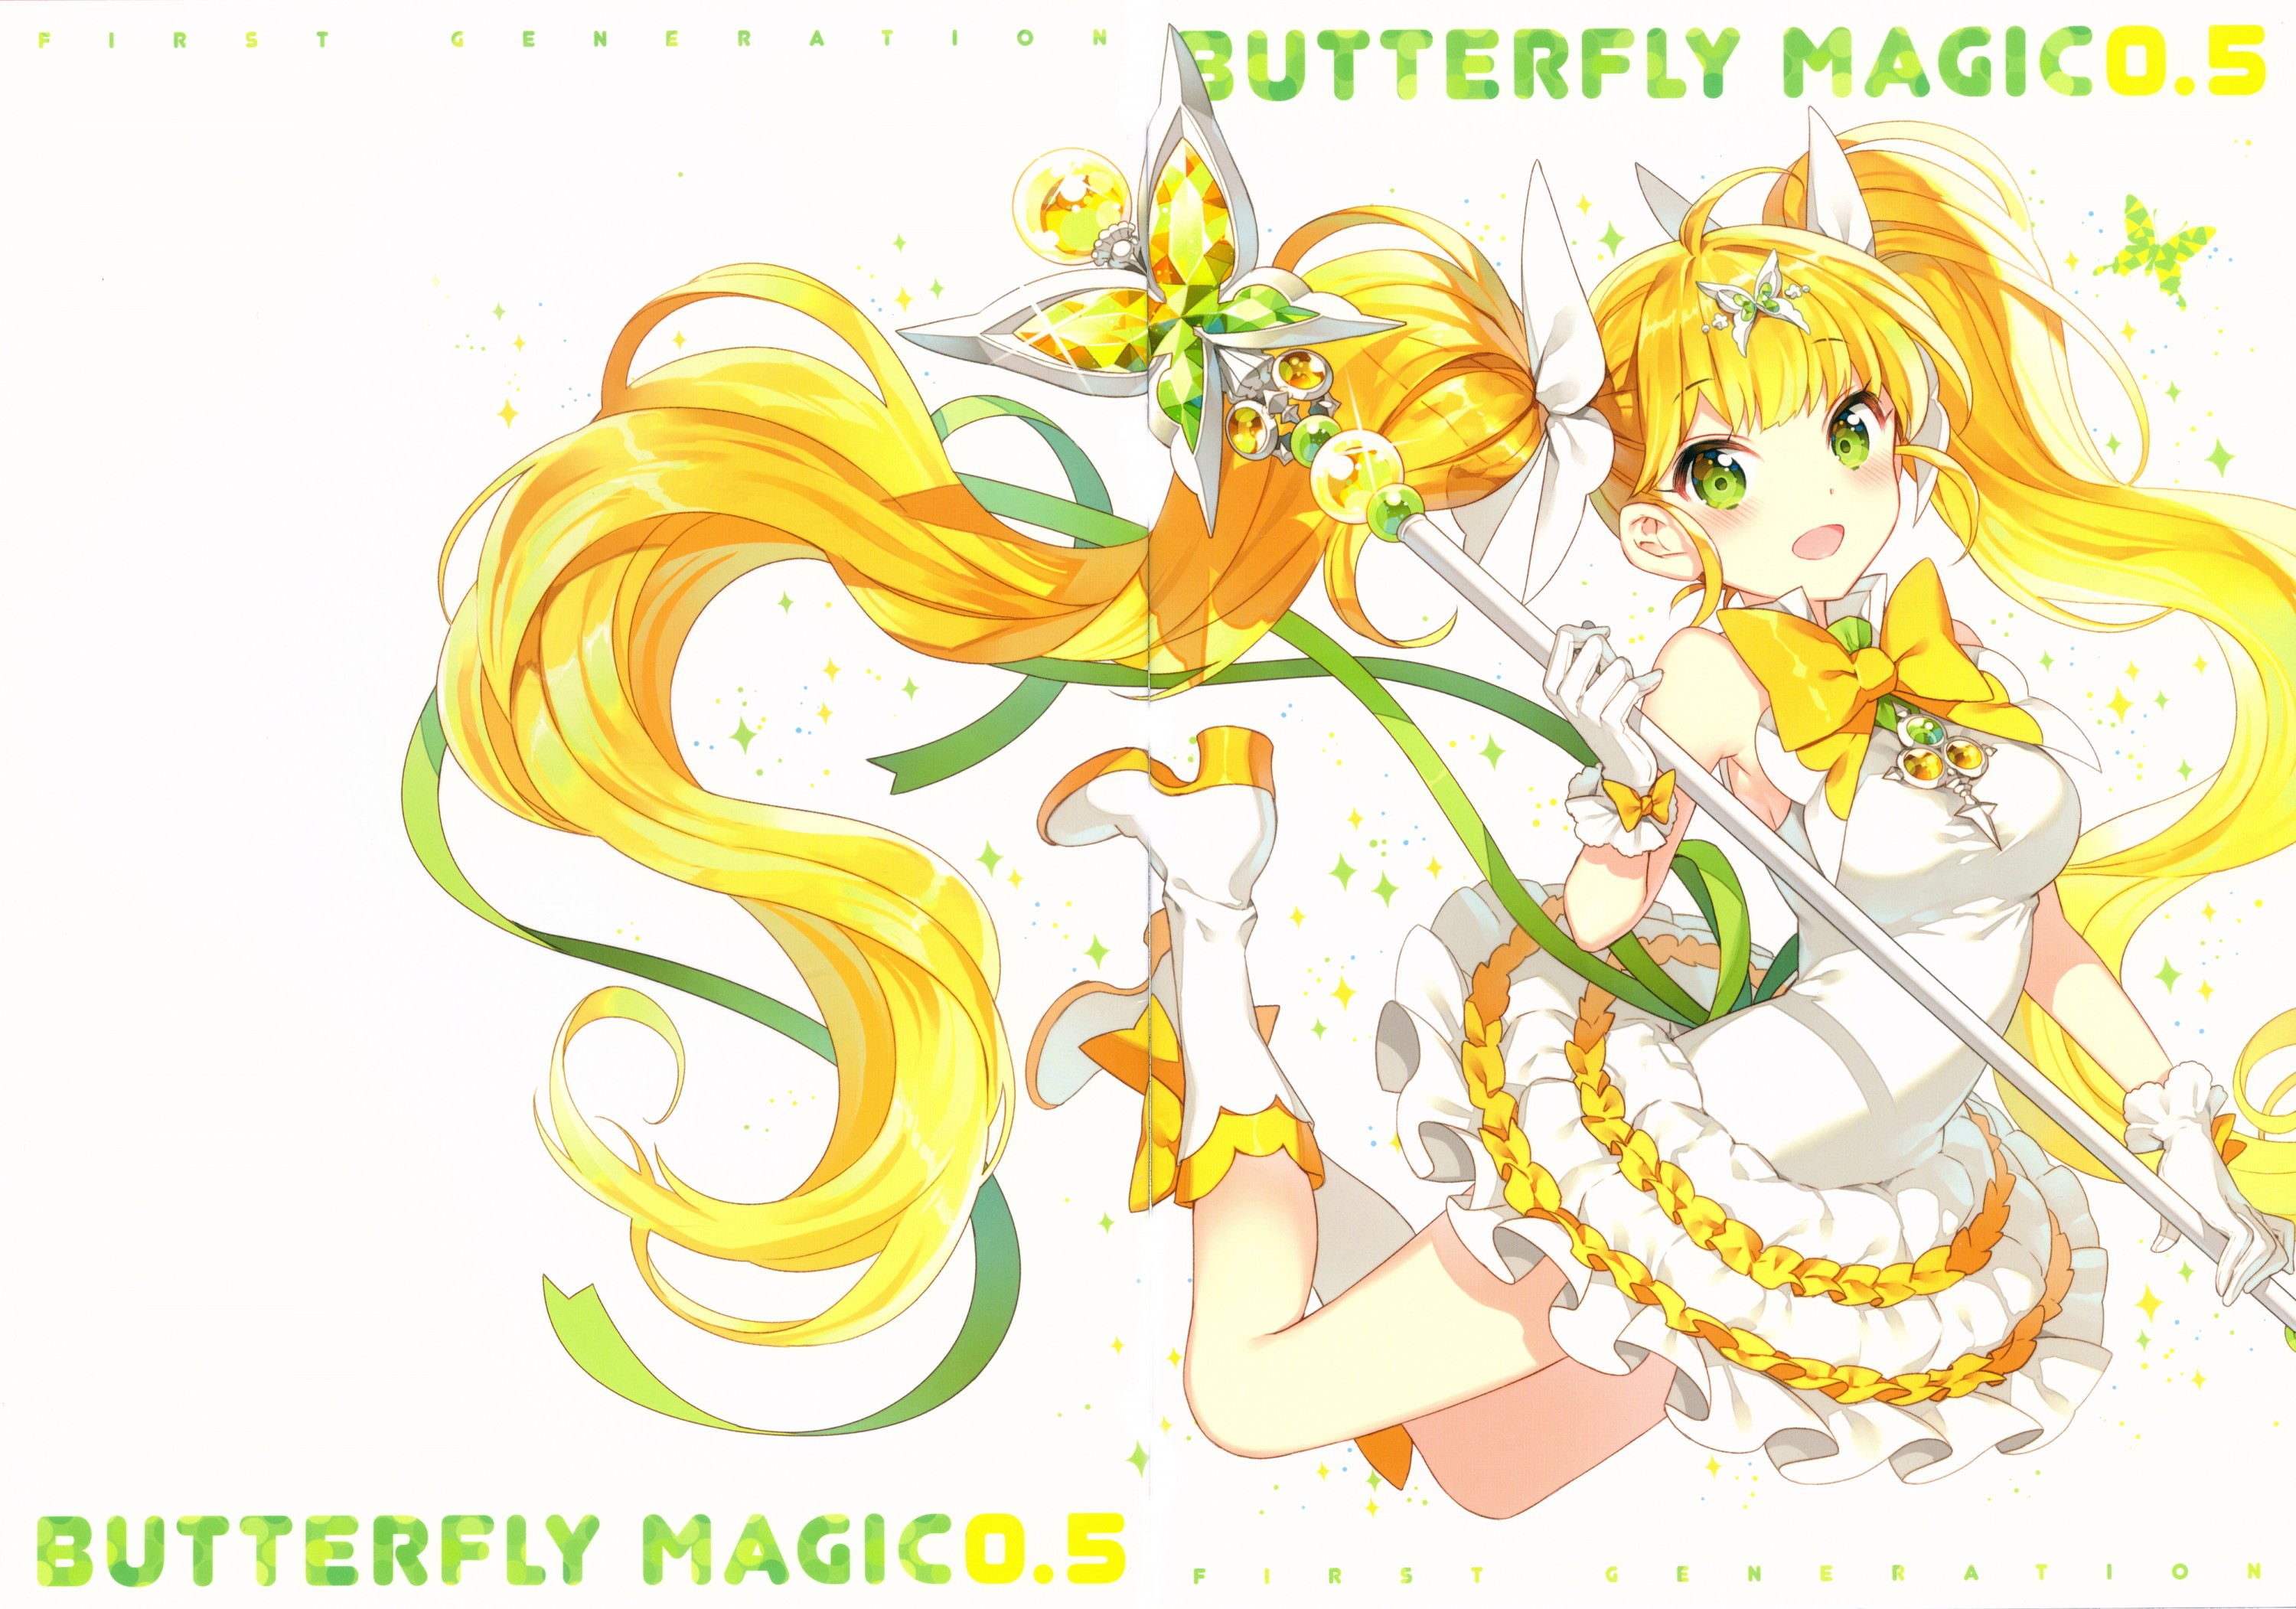 Butterfly Magic 0.5 first generation image by Kim Eunhye (Nardack)